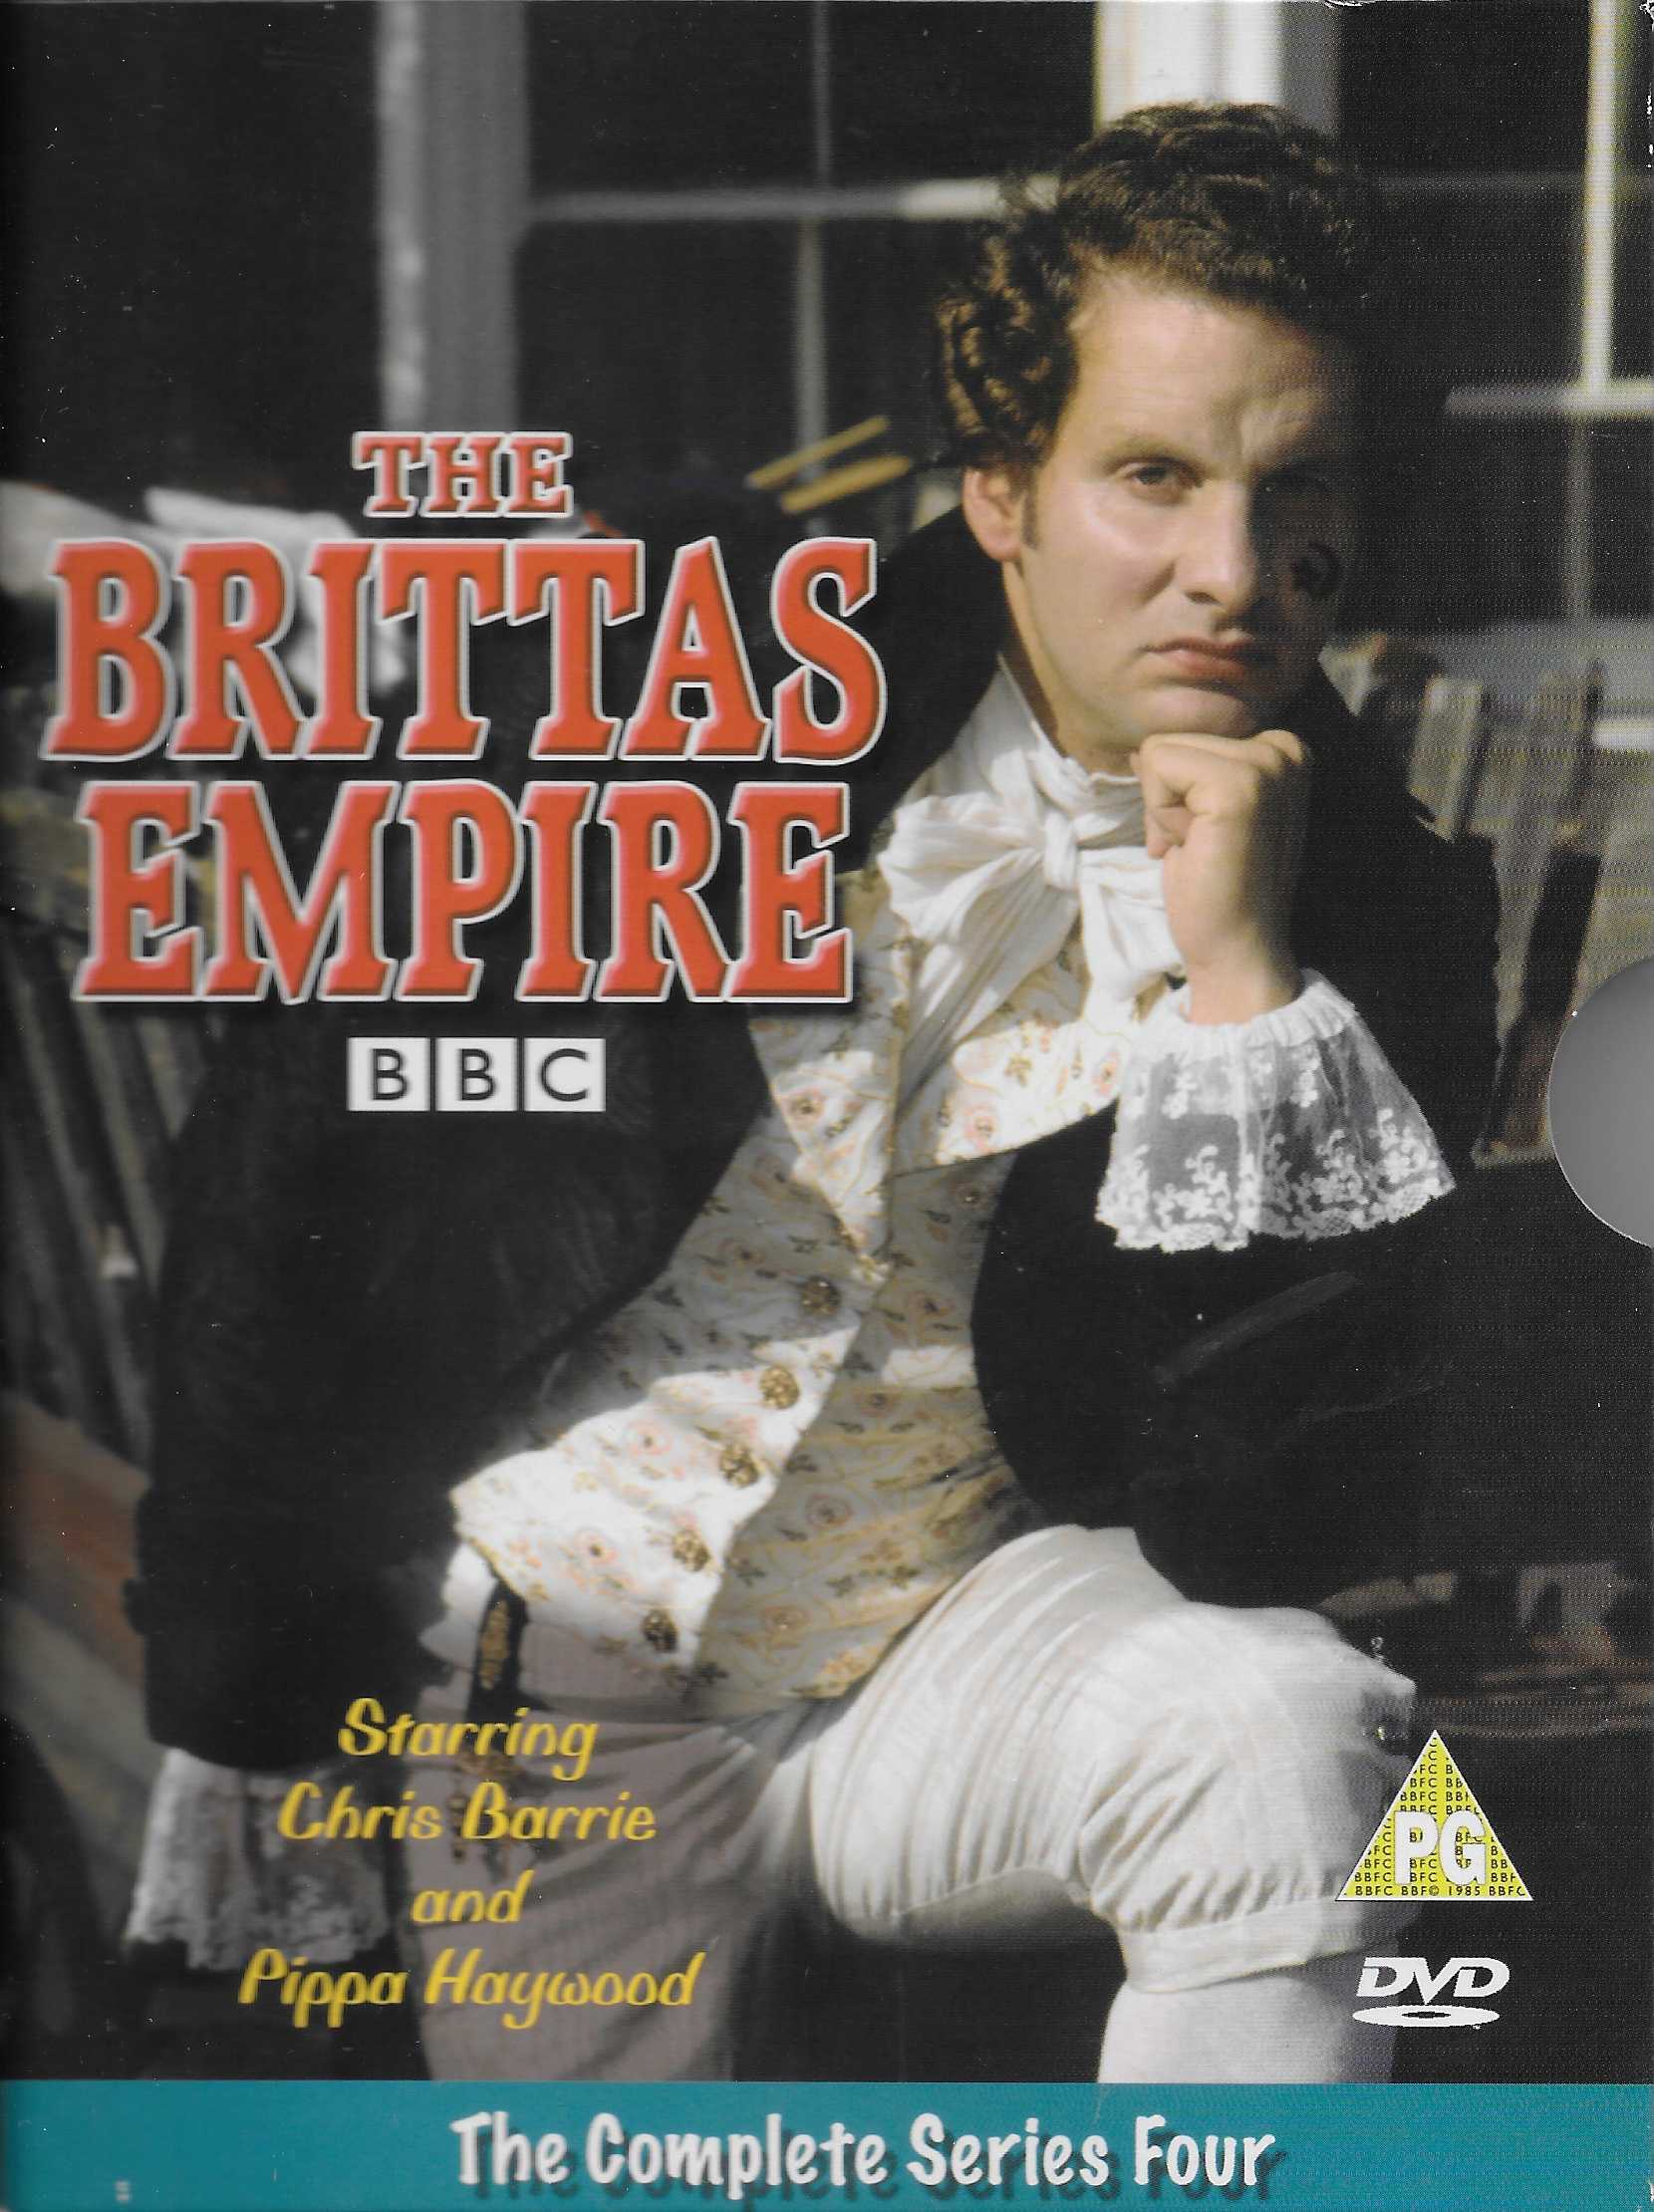 Picture of EKA 50016 The Brittas empire - Series 4 by artist Richard Fegen / Andrew Norriss from the BBC dvds - Records and Tapes library